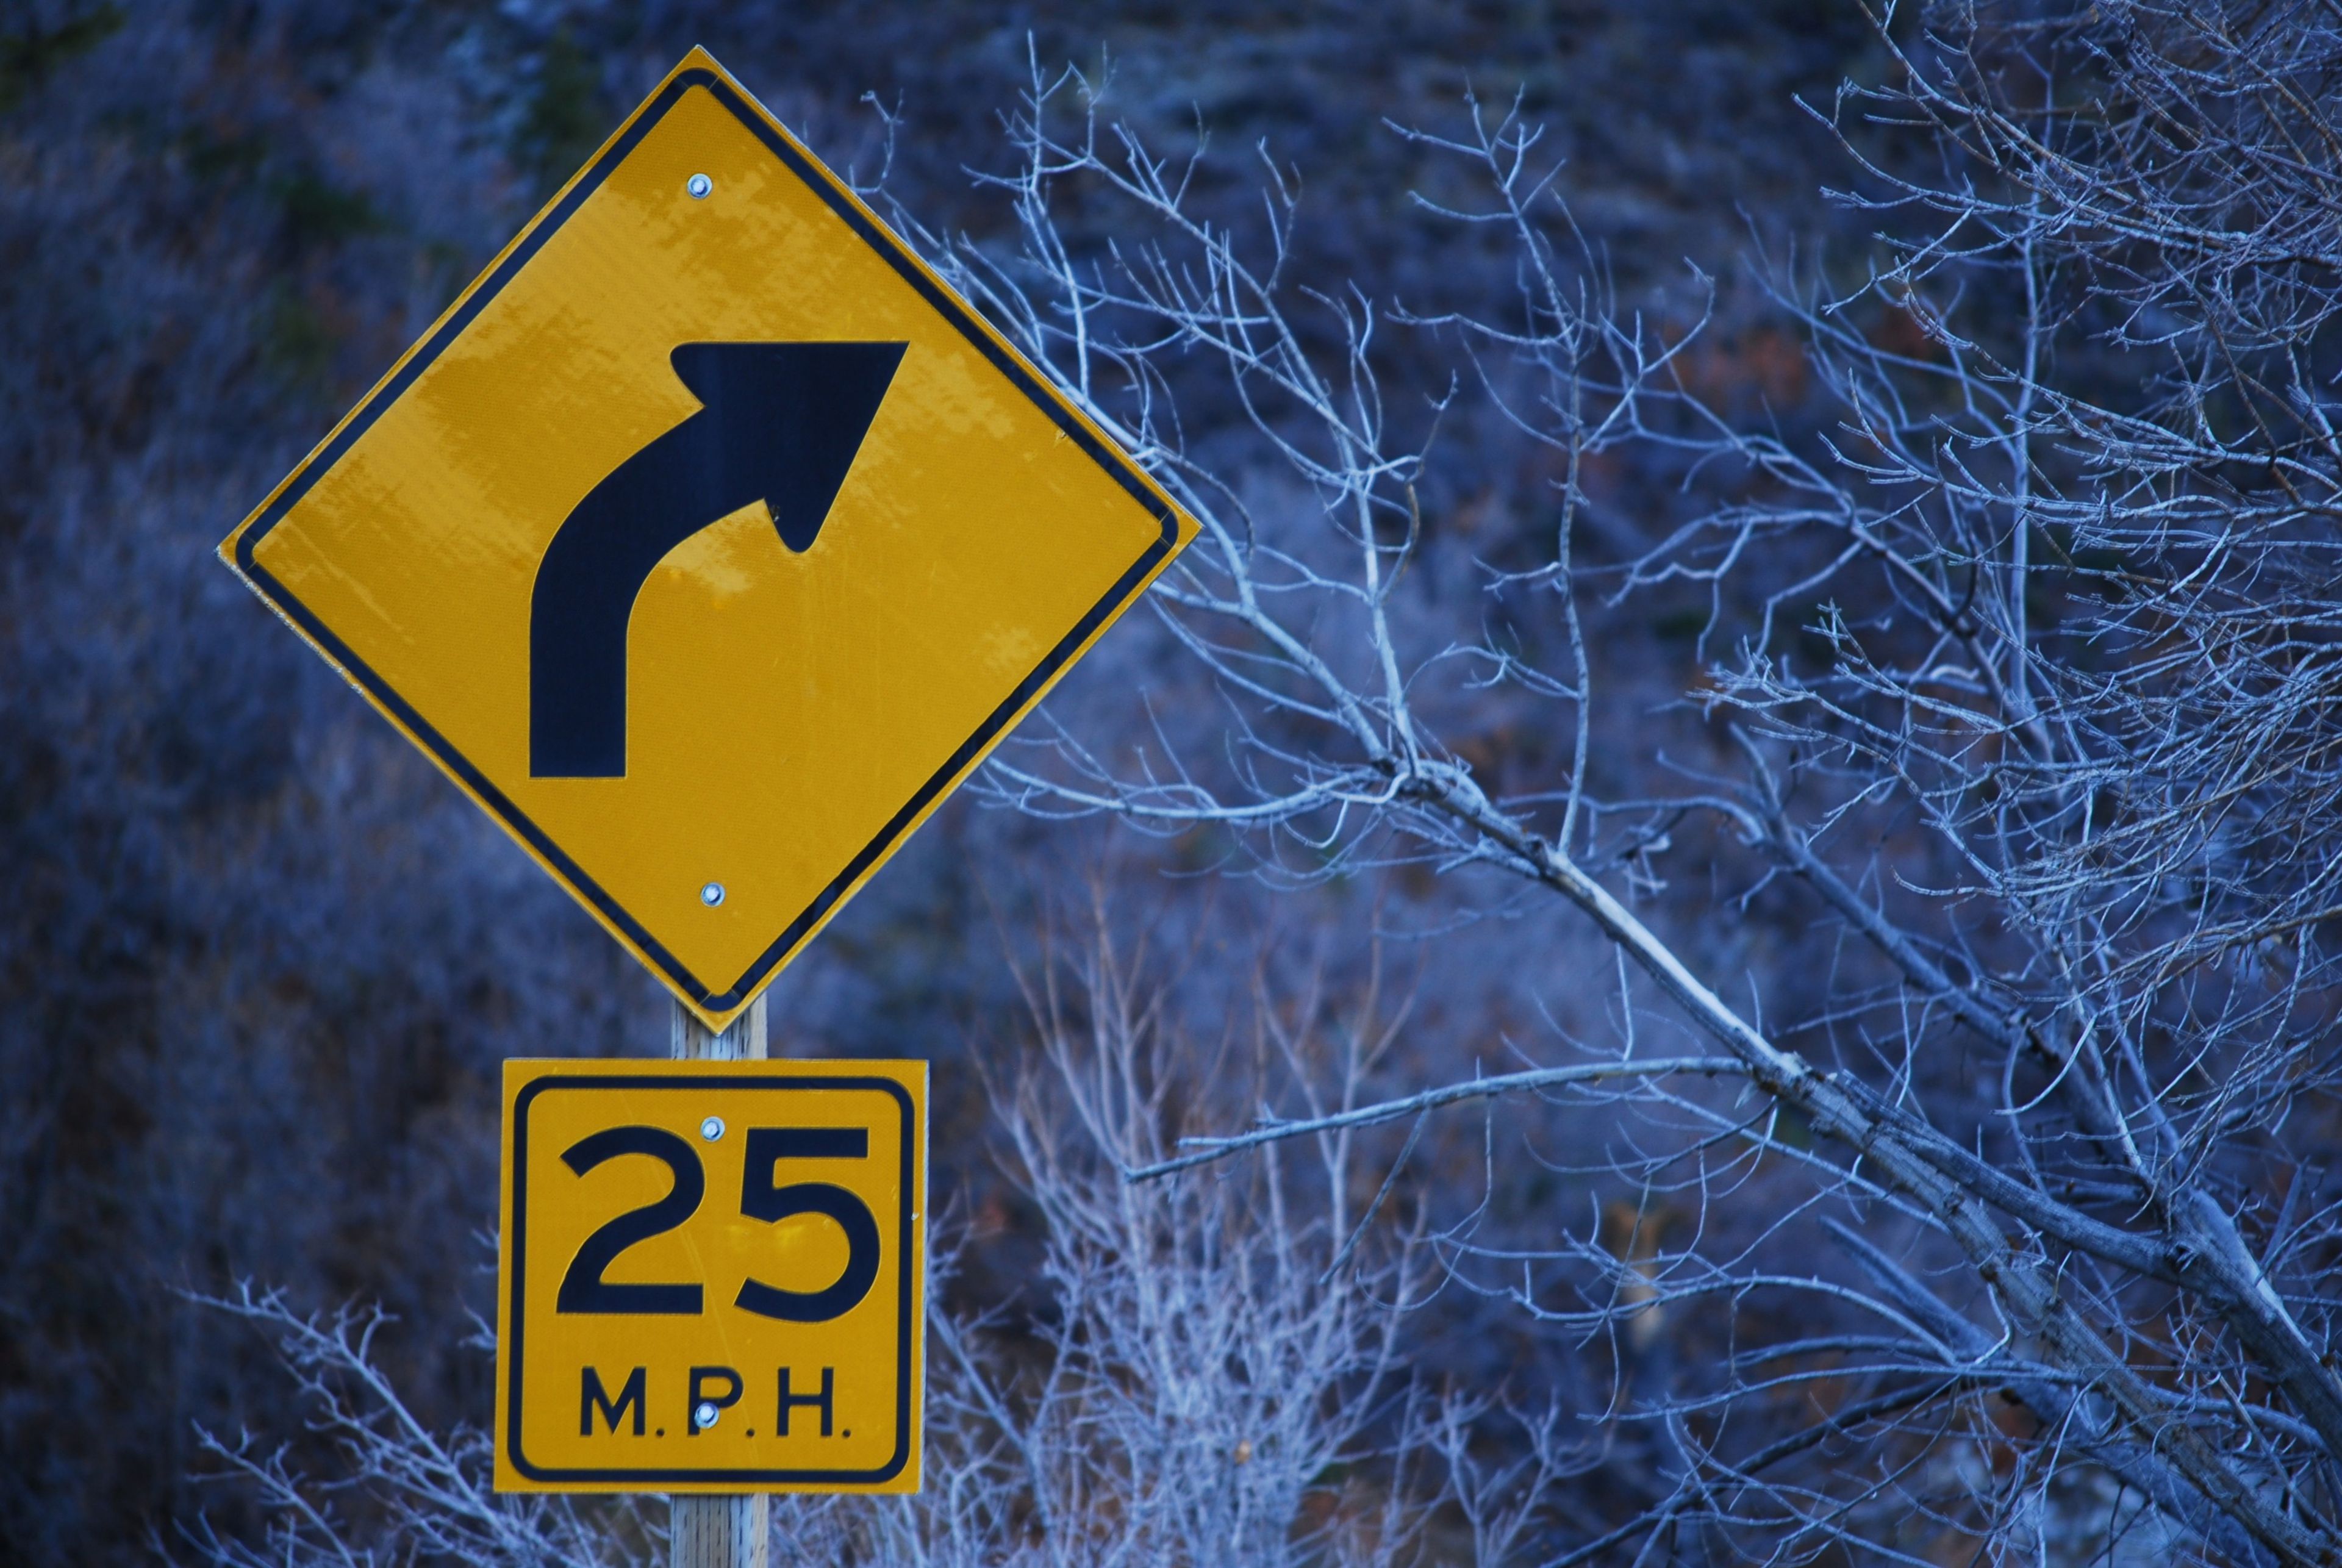 A “25 miles per hour” street sign in the cold winter.